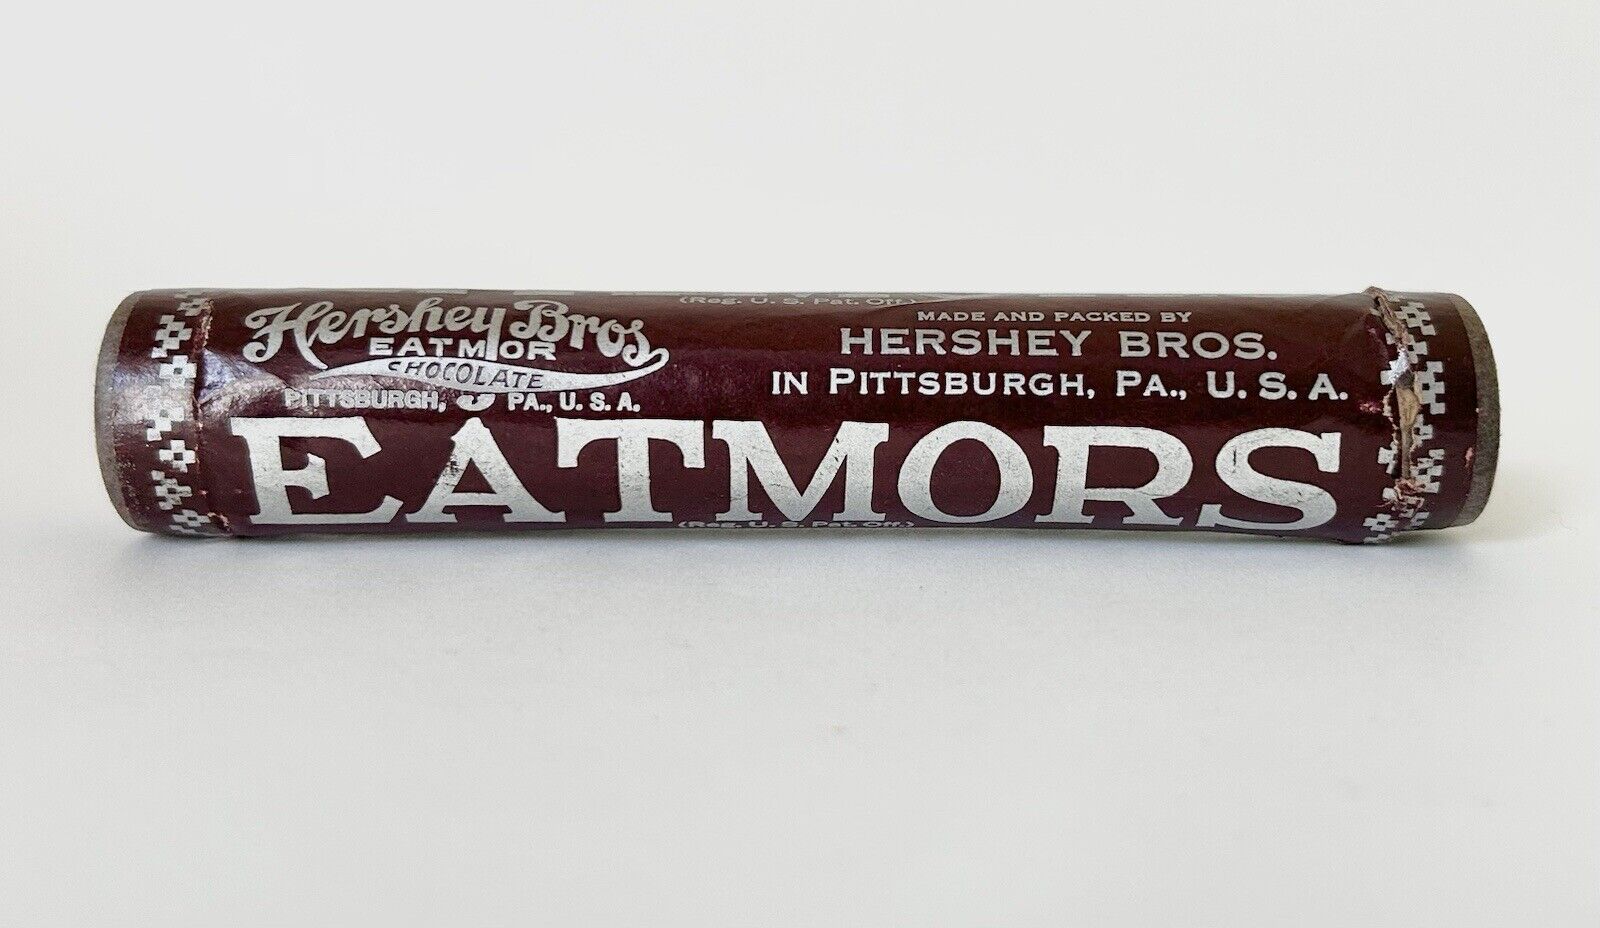 Vintage 1932 Hershey Bros EAT-MORS Carton Tube Candy Container 6” PITTSBURGH